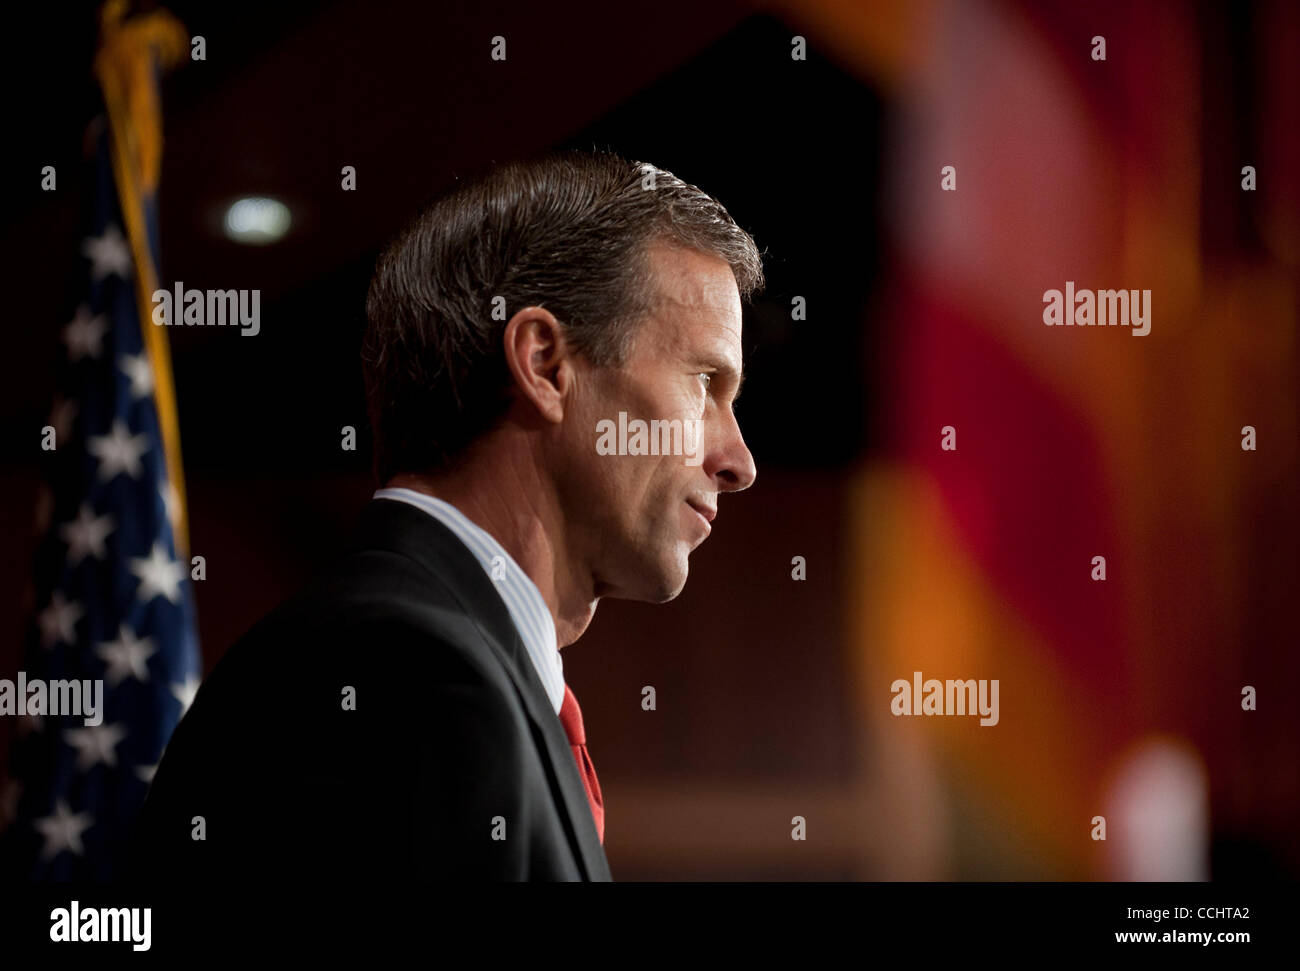 Dec 15, 2010 - Washington, District of Columbia, U.S. -  Senator JOHN THUNE (R-SD) during a news conference on their opposition to the omnibus spending bill. (Credit Image: © Pete Marovich/ZUMAPRESS.com) Stock Photo